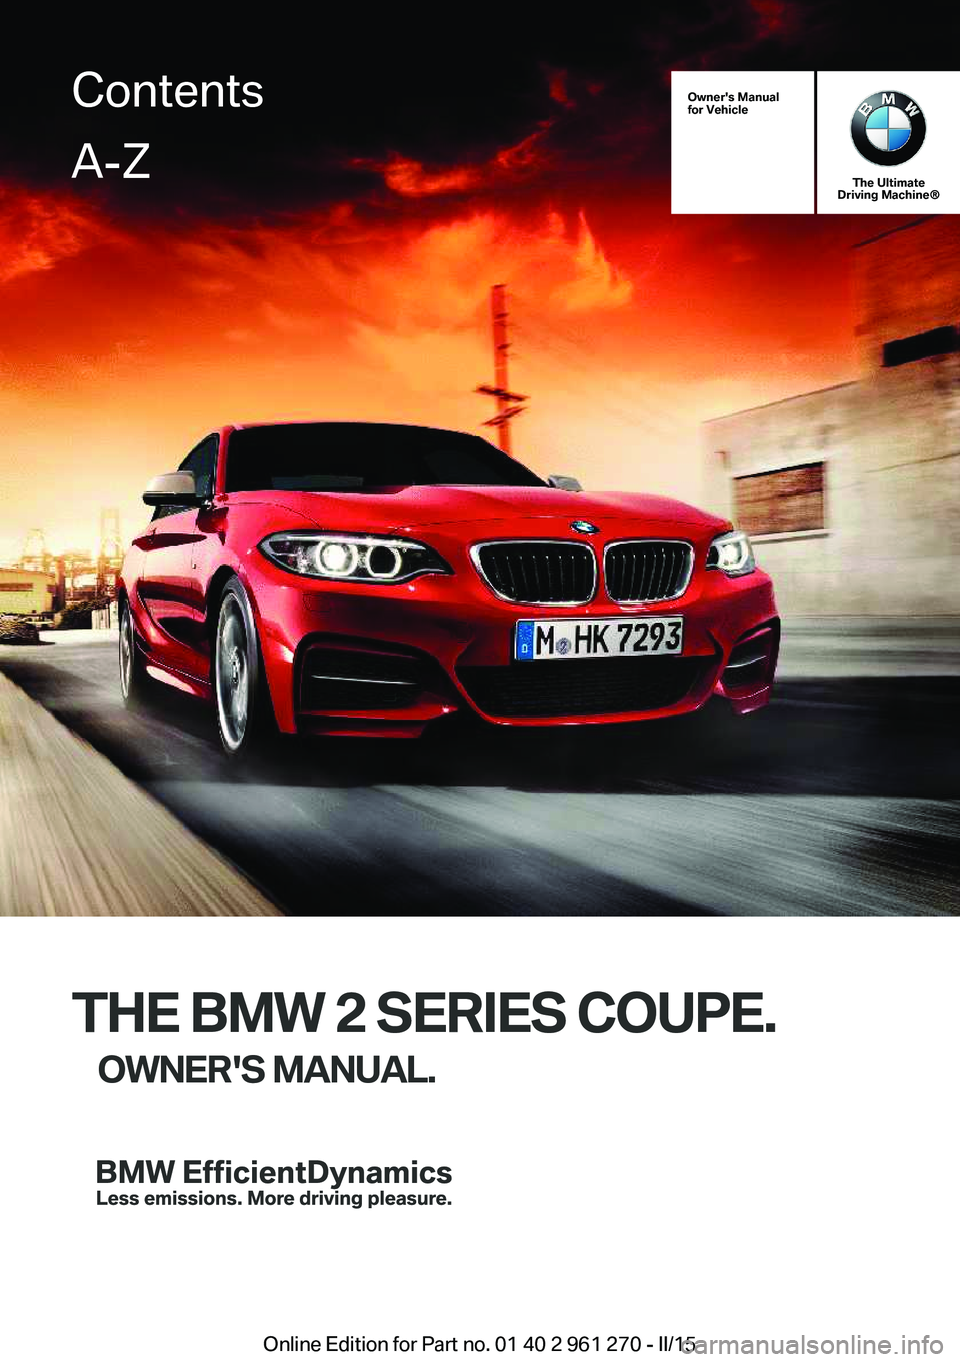 BMW M235I XDRIVE COUPE 2016  Owners Manual Owner's Manual
for Vehicle
The Ultimate
Driving Machine®
THE BMW 2 SERIES COUPE.
OWNER'S MANUAL.
ContentsA-Z
Online Edition for Part no. 01 40 2 961 270 - II/15   